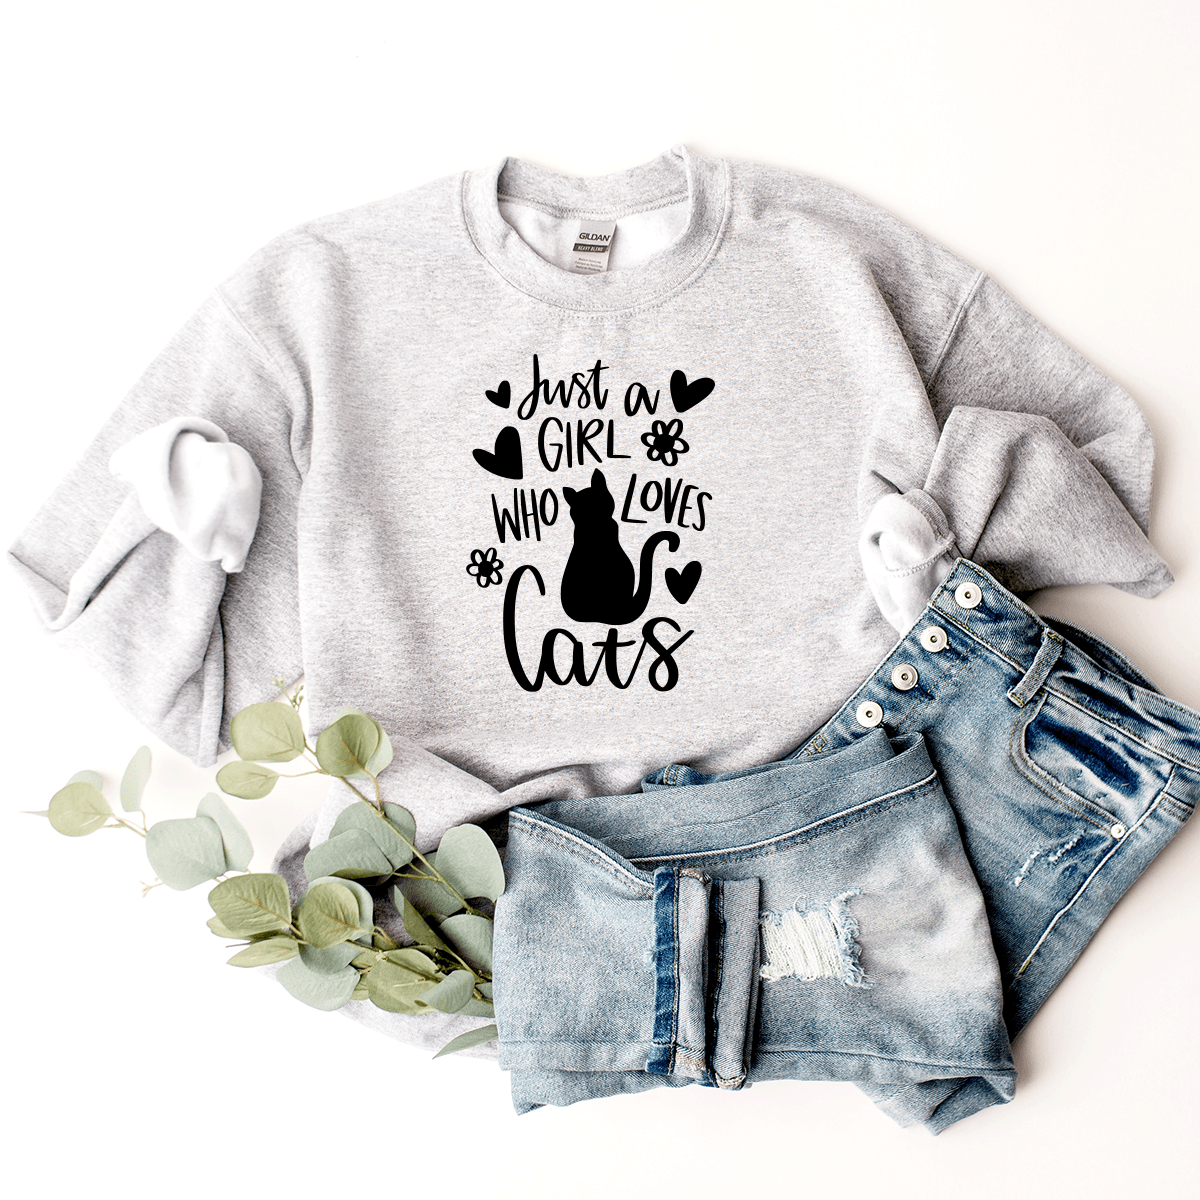 Just A Girl Who Loves Cats - Sweatshirt